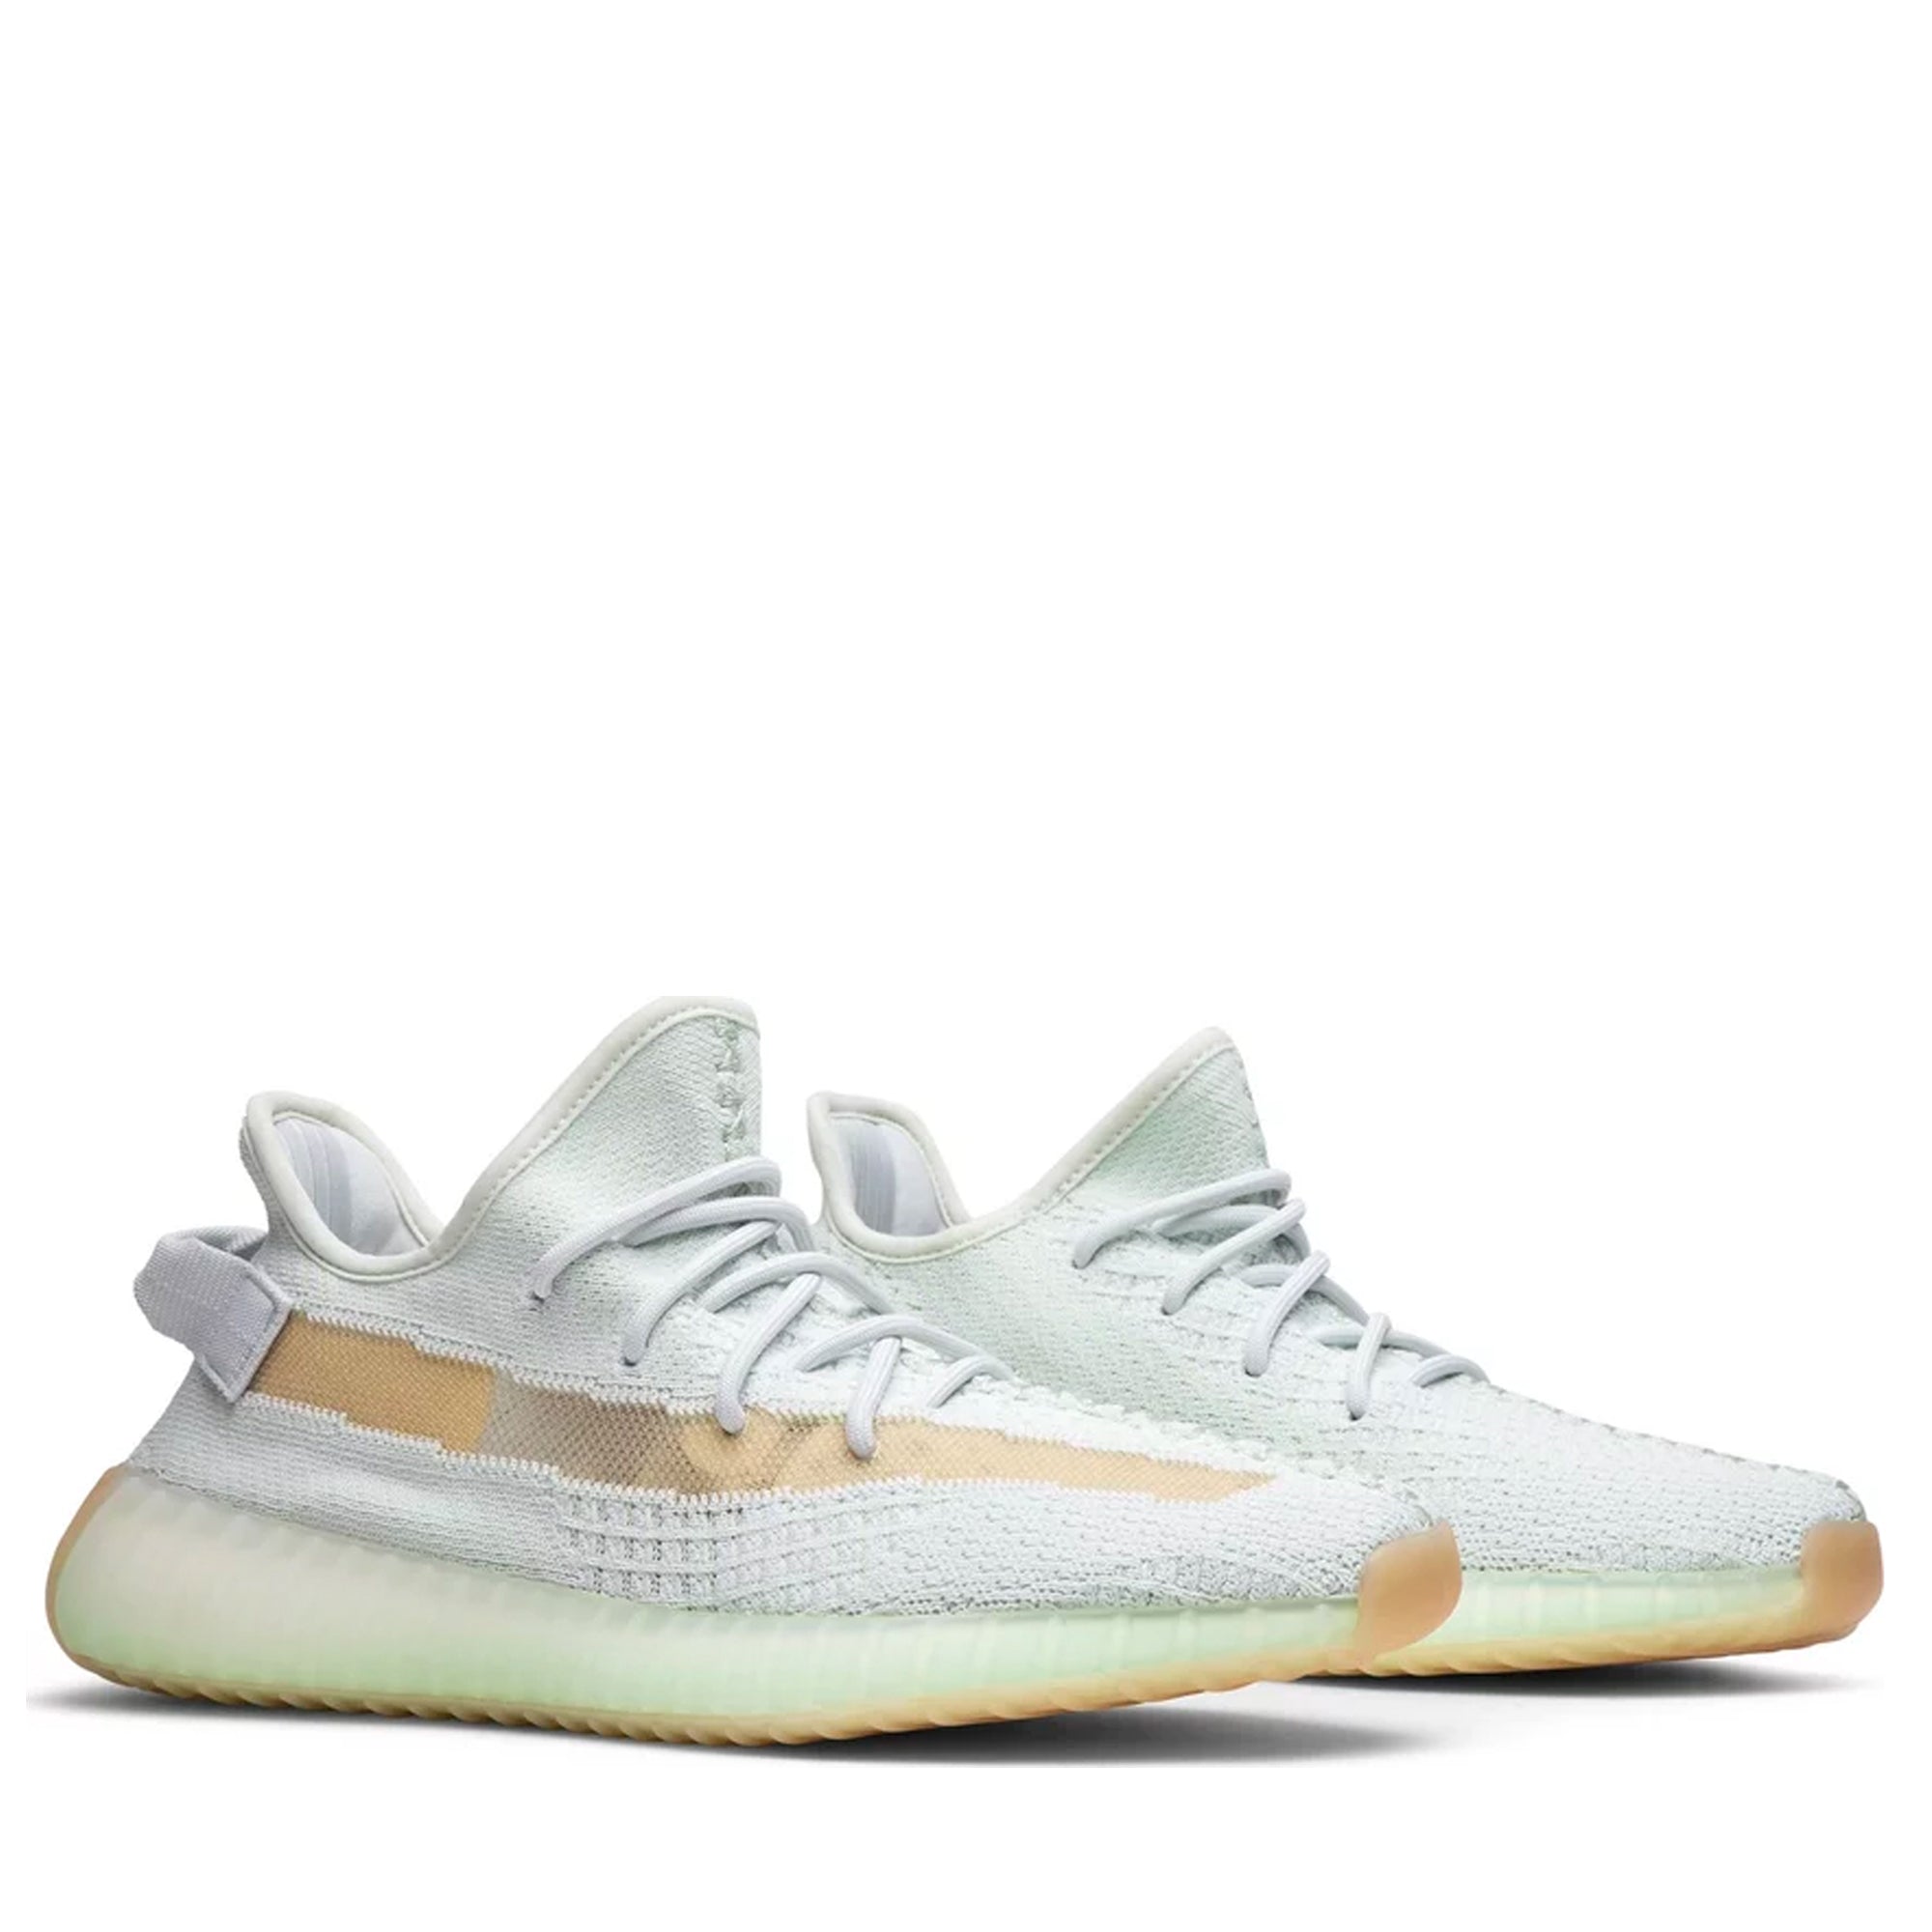 adidas Yeezy Boost 350 V2 Hyperspace-PLUS